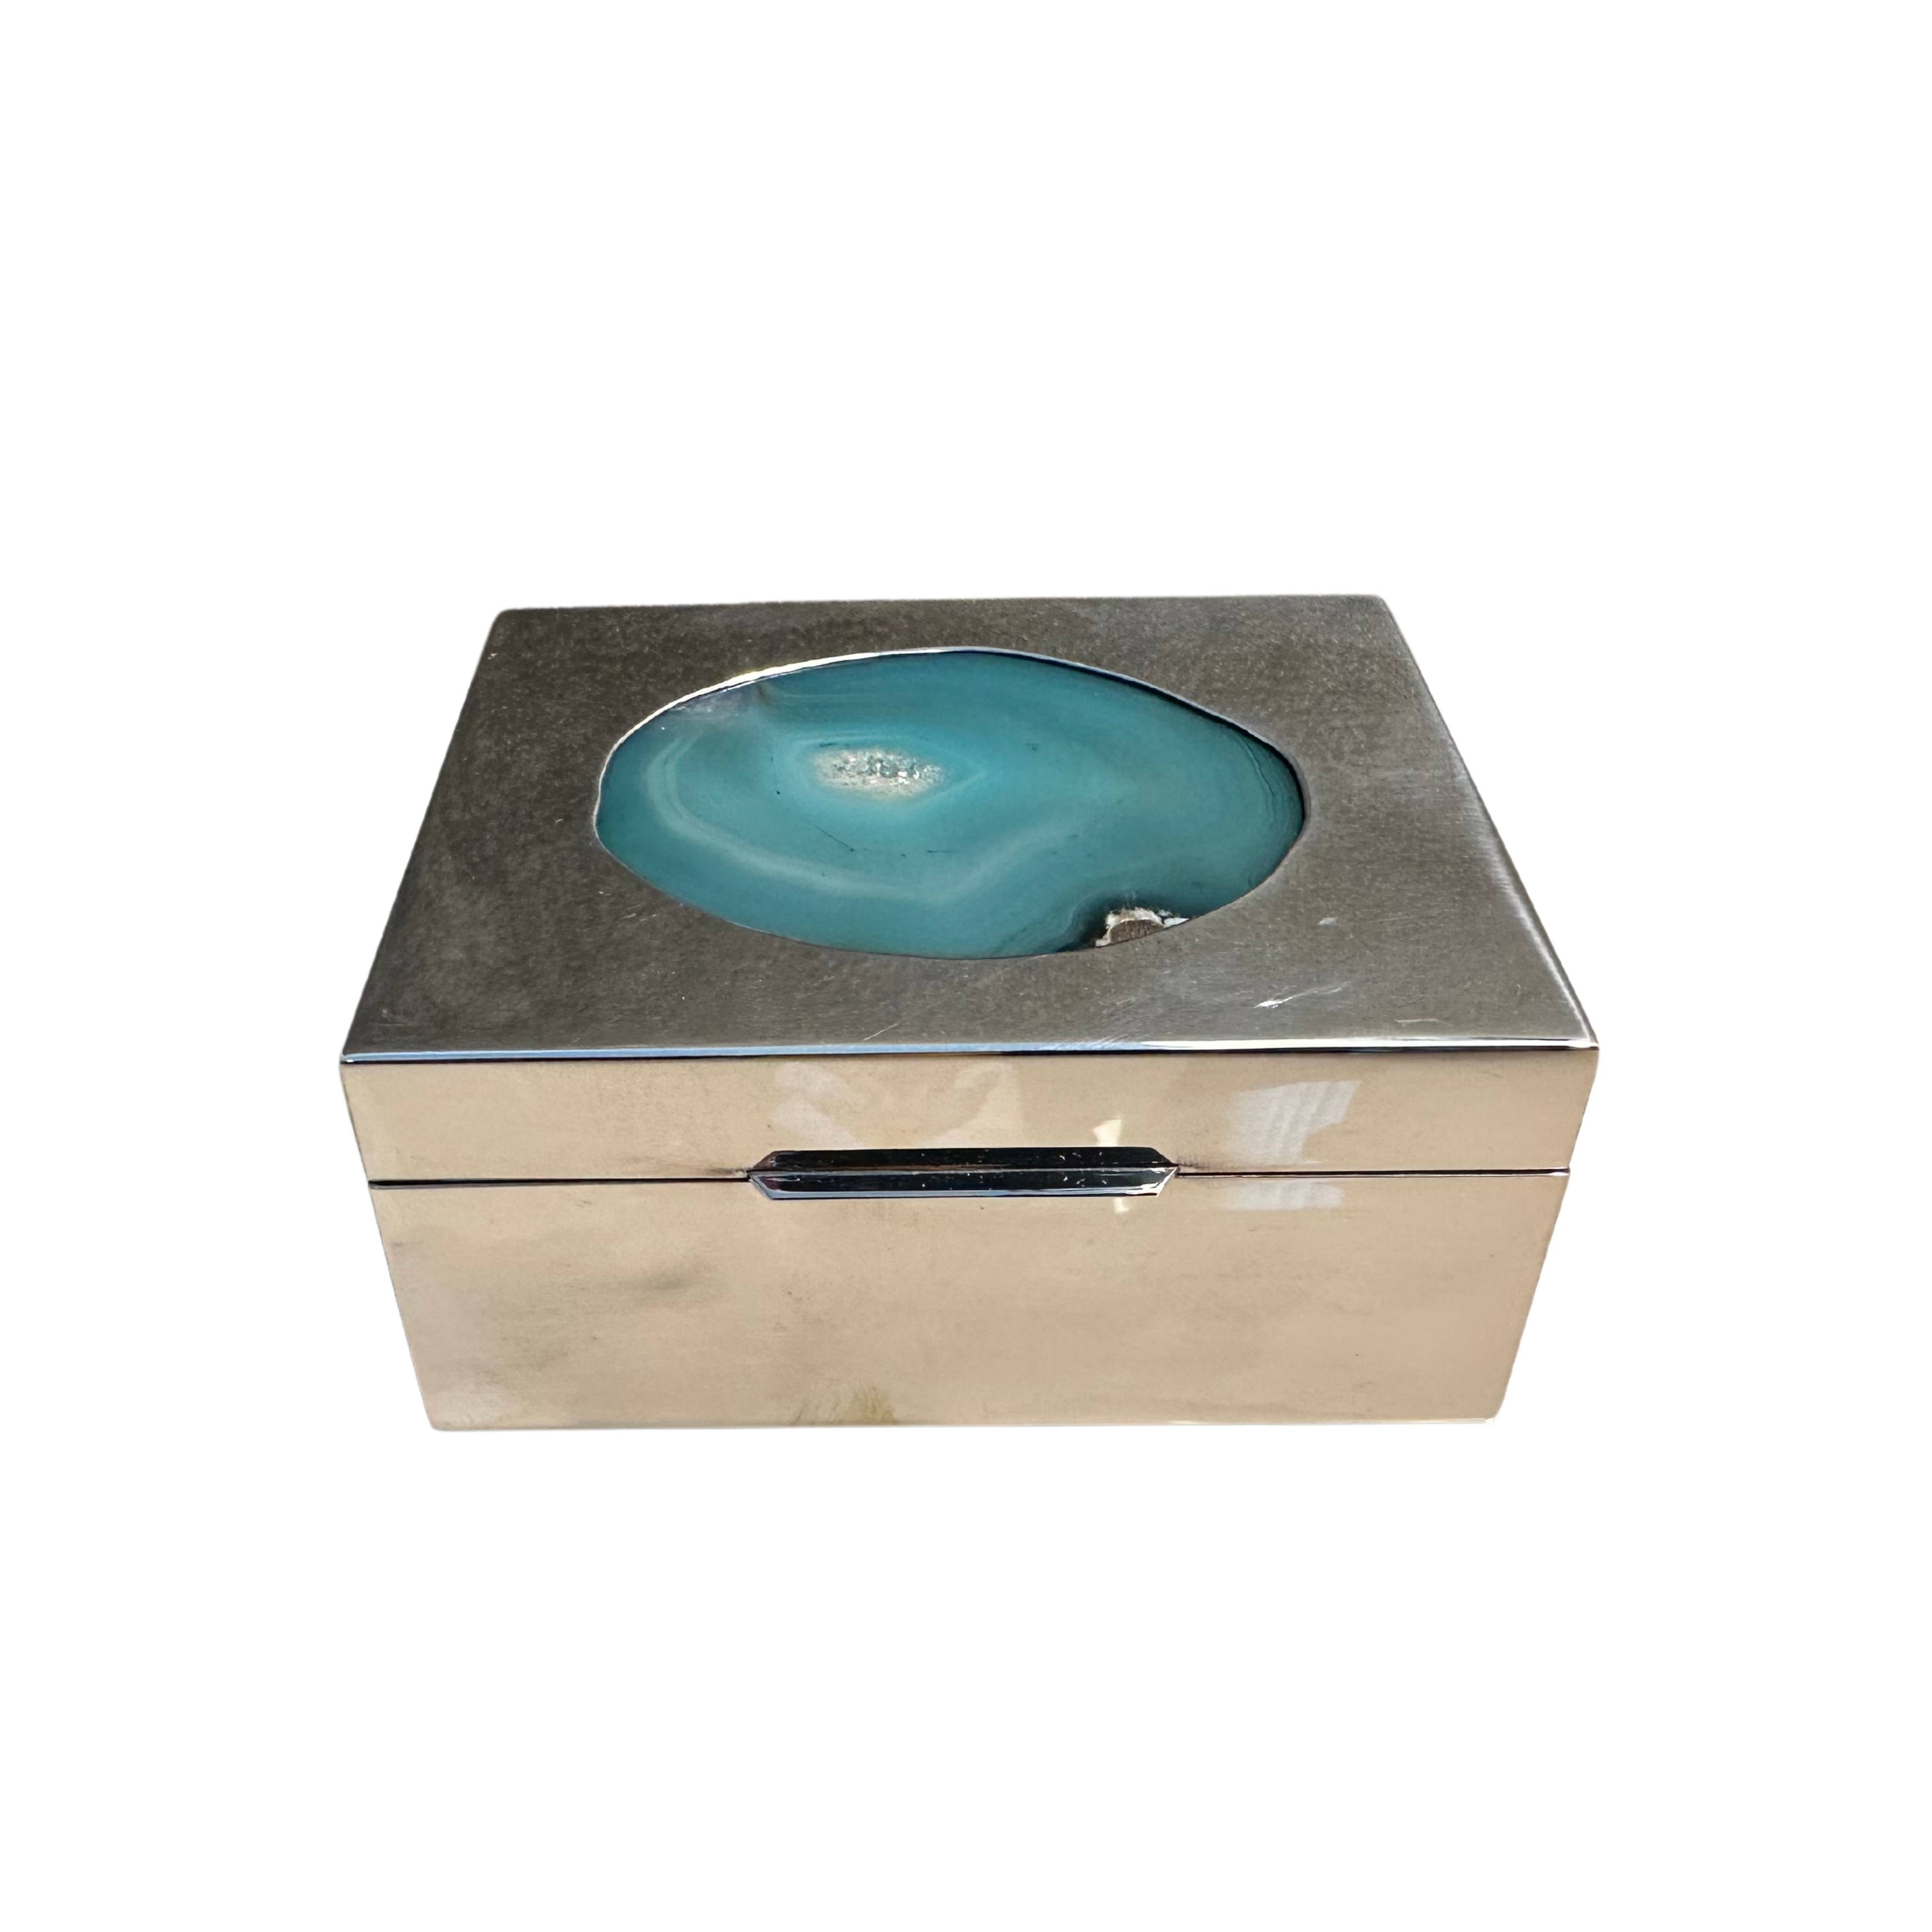 Handmade 925 sterling silver box with green agate and wooden interior